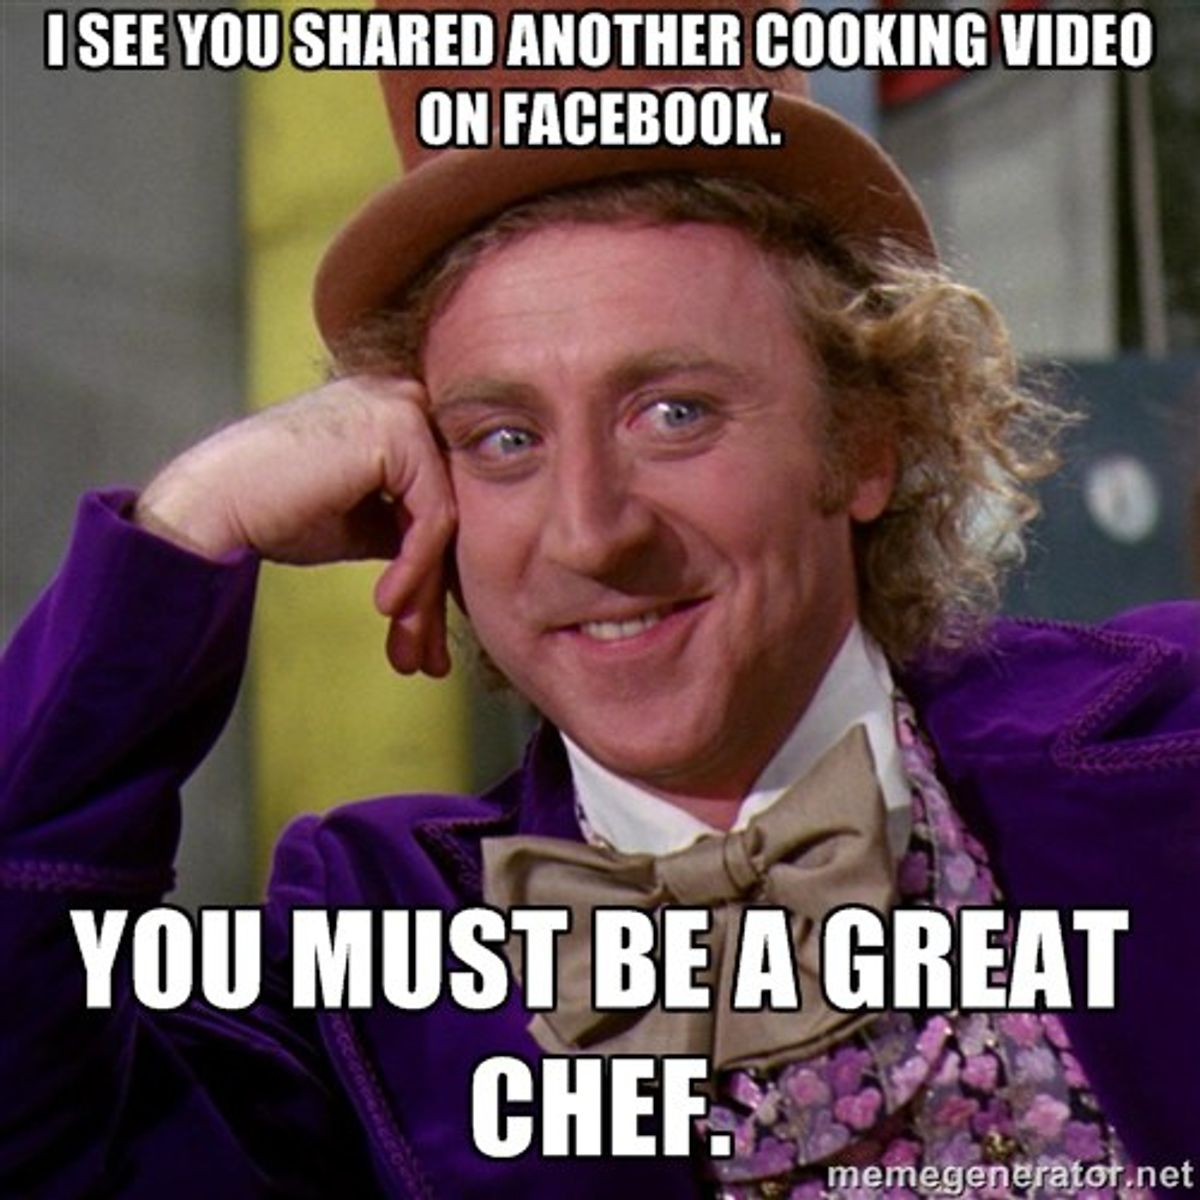 10 Thoughts You Instantly Have When You See a Cooking Video on Facebook